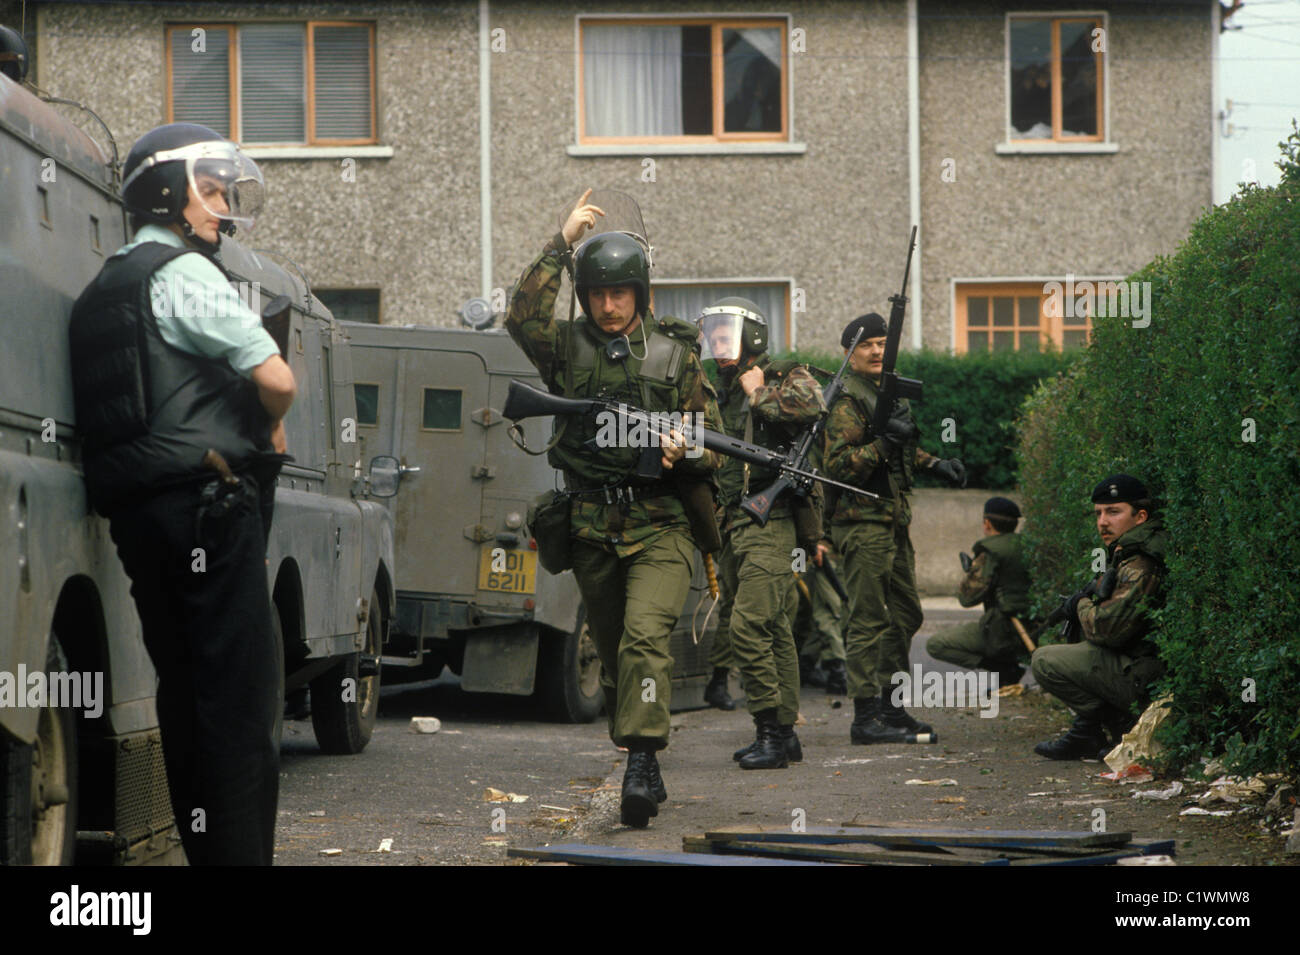 Northern Ireland The Troubles. 1980s. British Troops the British army soldiers and RUC policeman Belfast 1981 HOMER SYKES Stock Photo